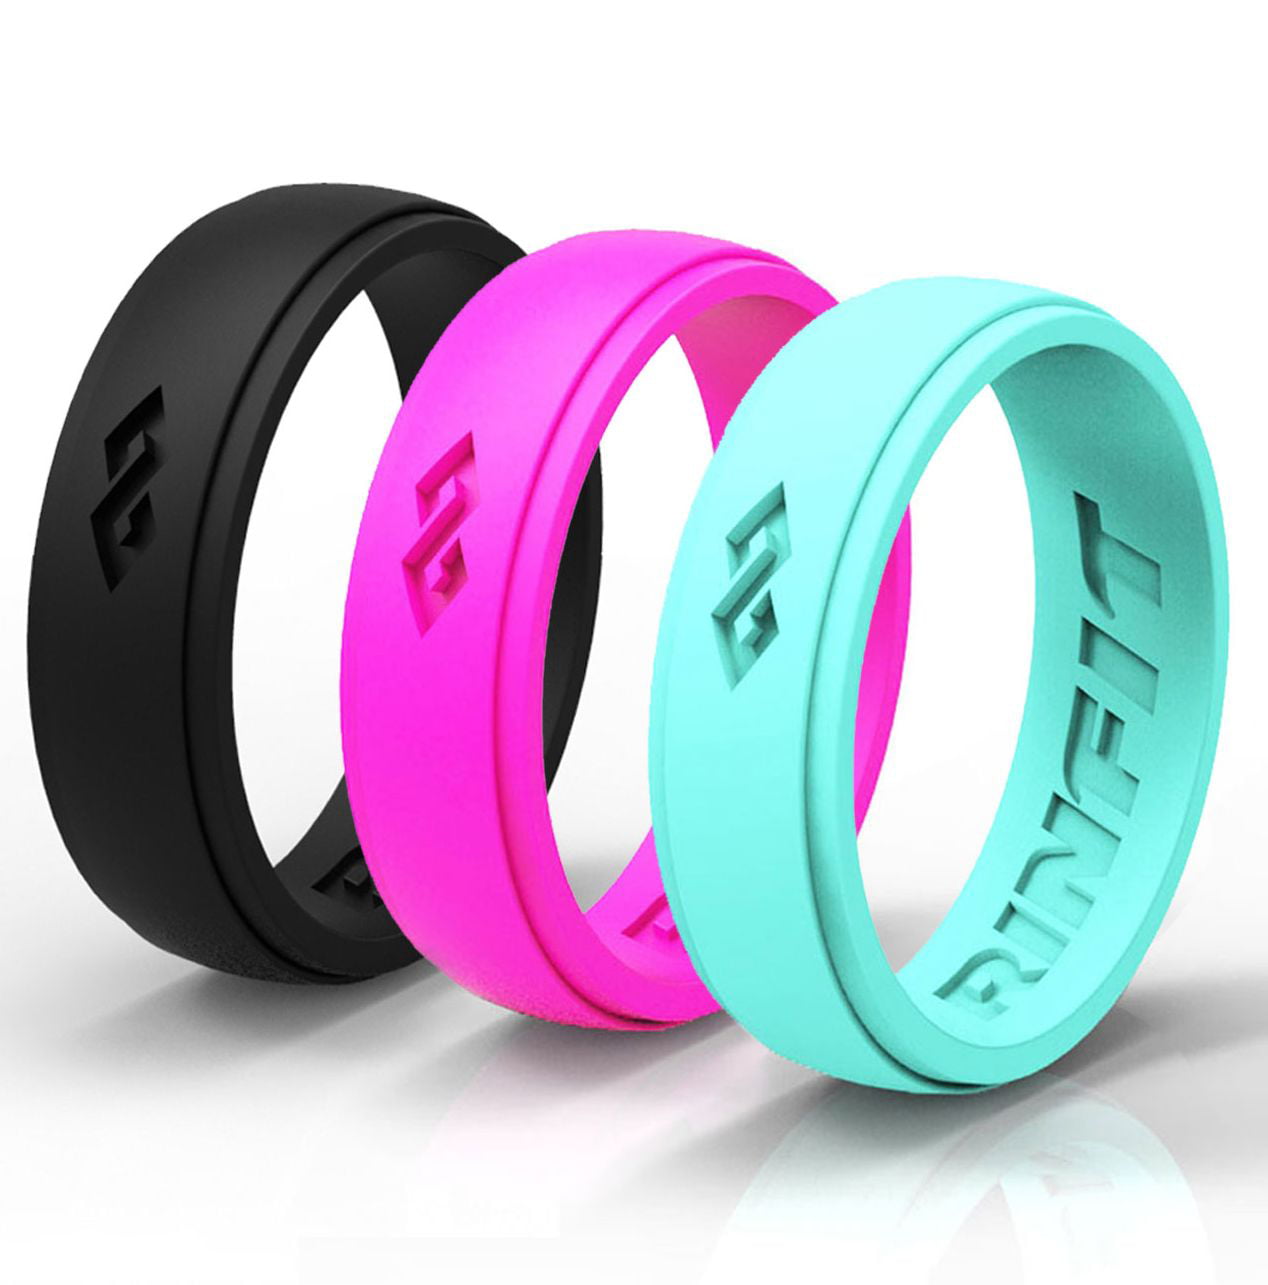 Women's Silicone Ring Wedding Band 3 Silicone Rings Pack Silicone